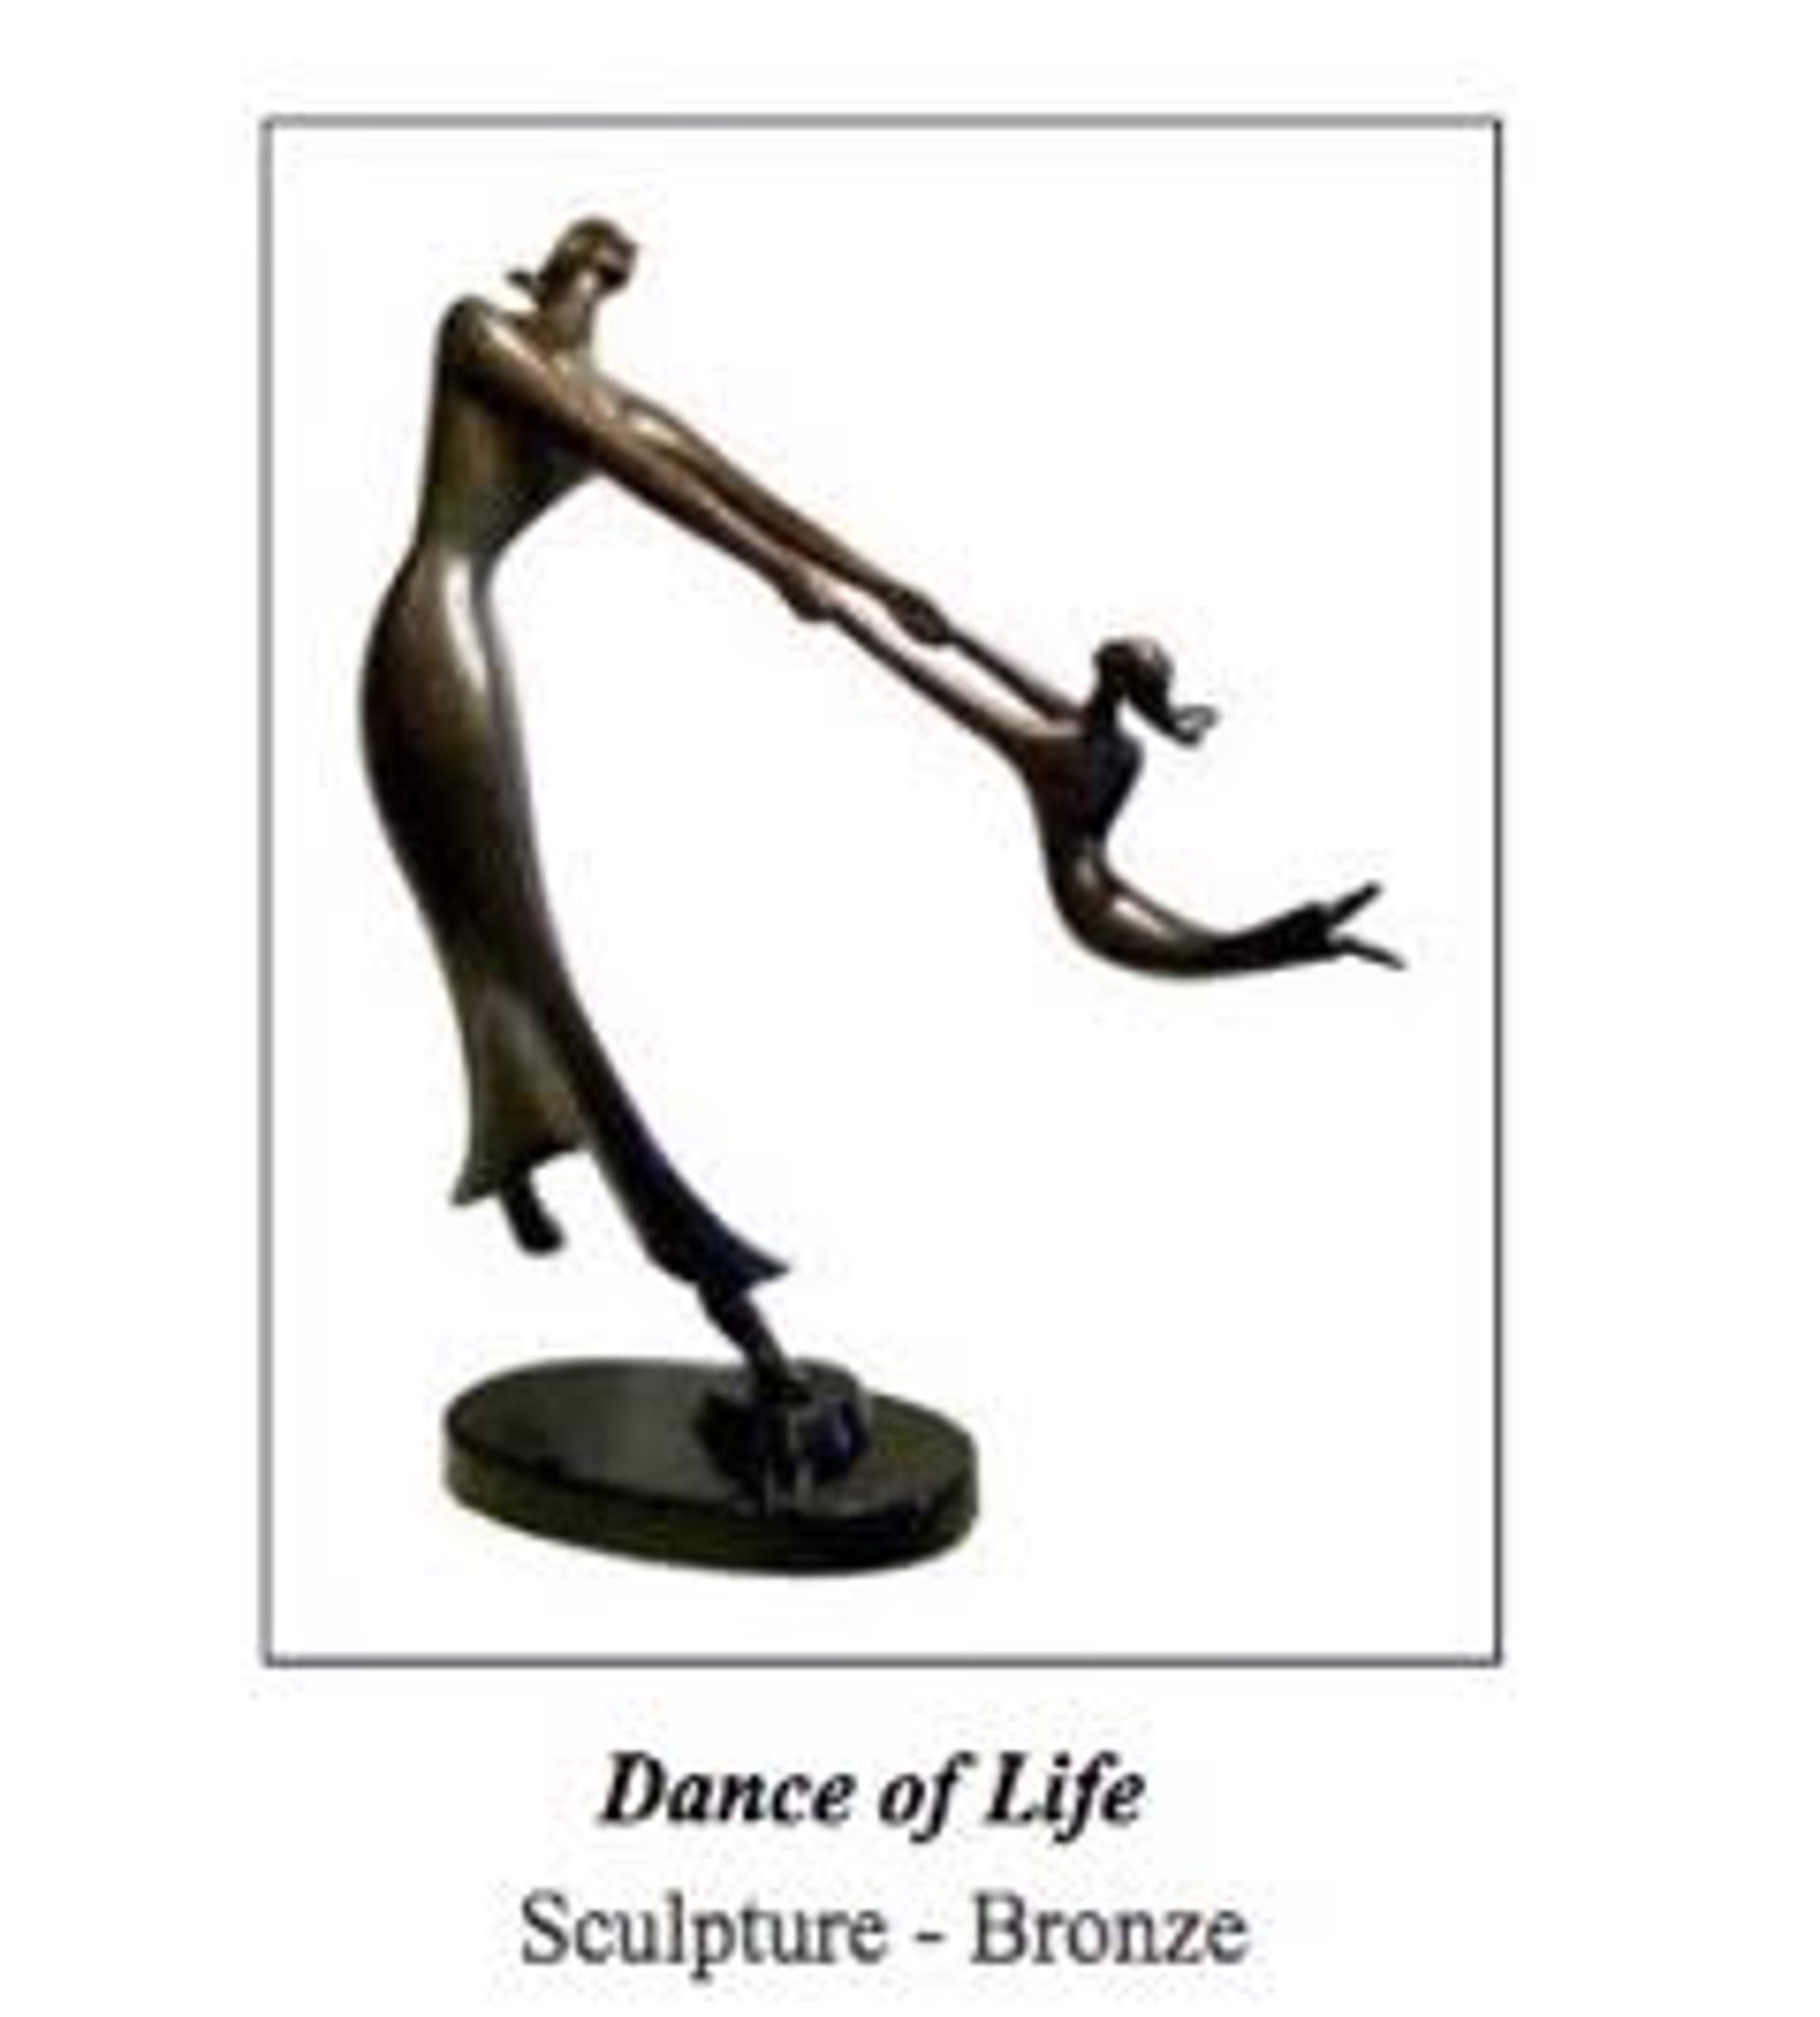 Dance of Life (Table Top) by D.E. McDermott